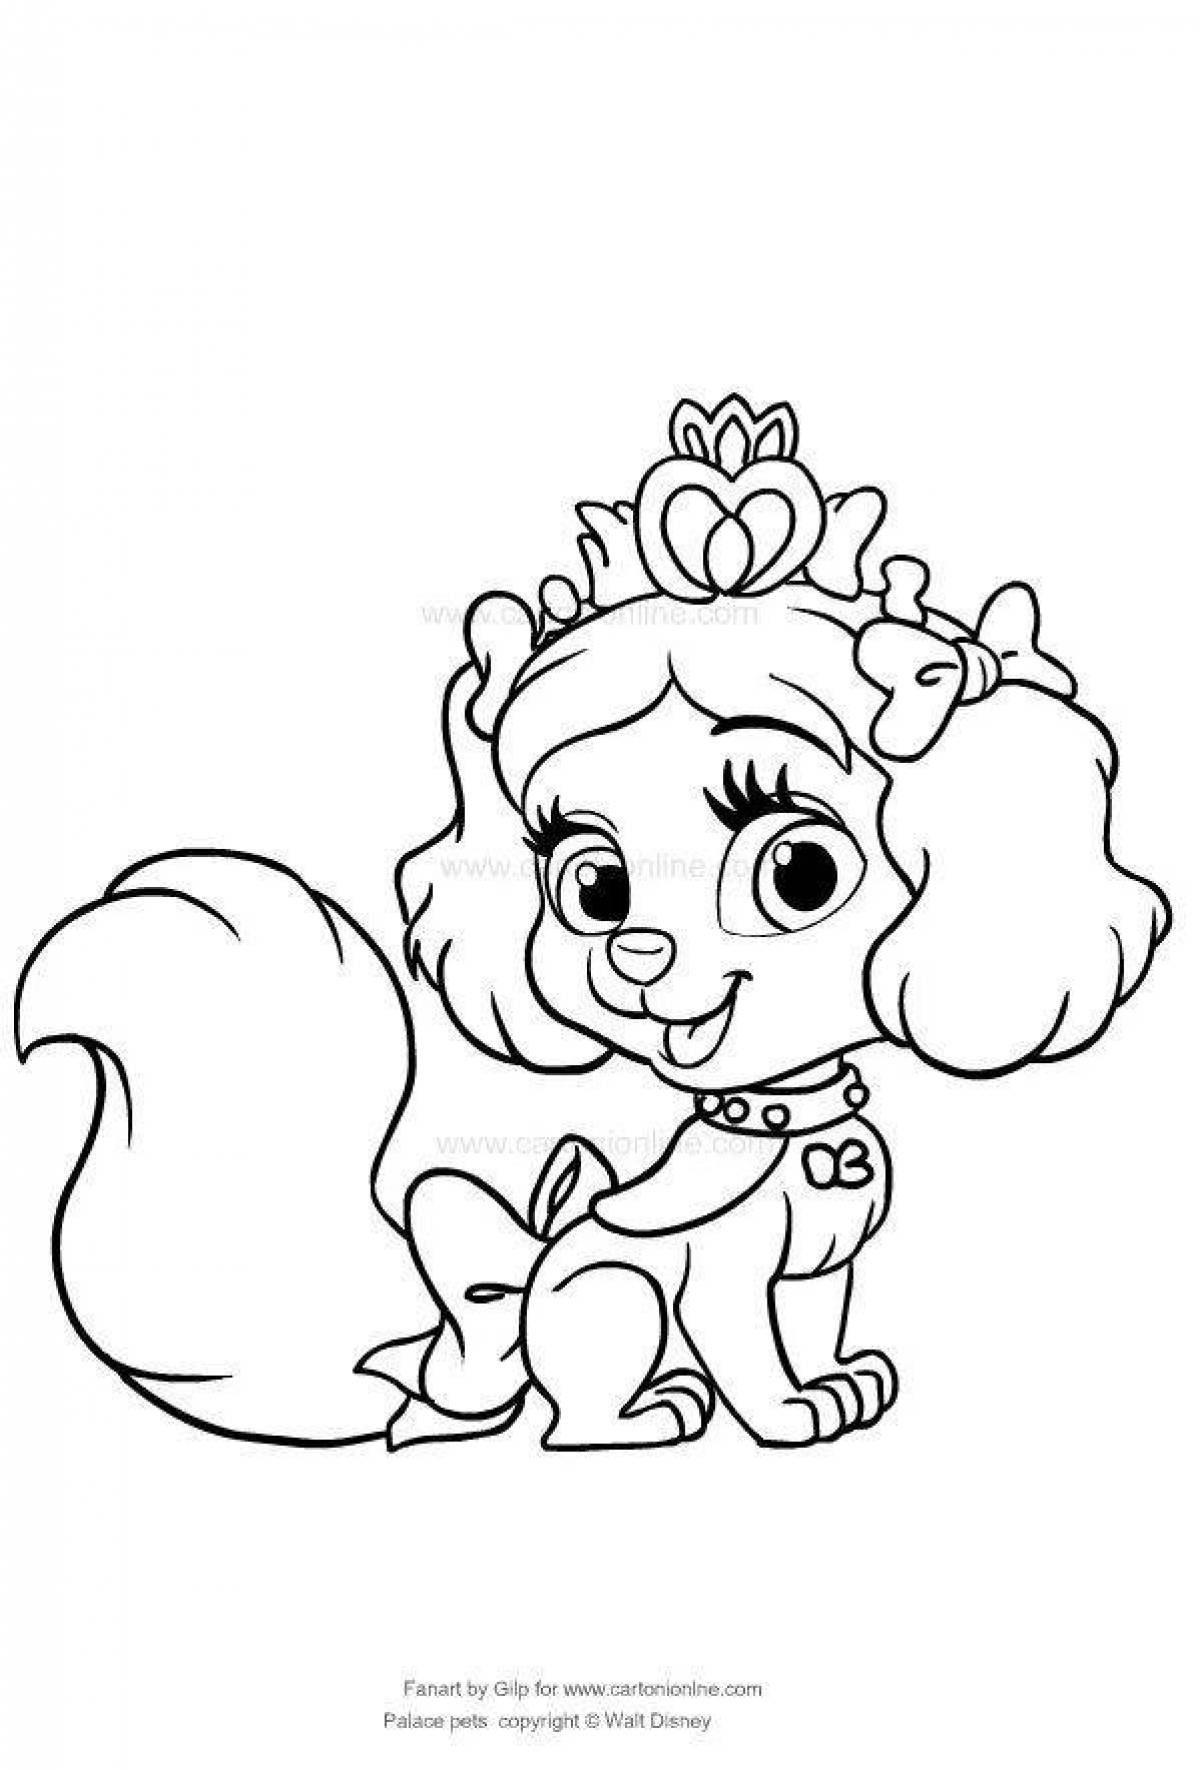 Adorable furry friends coloring pages